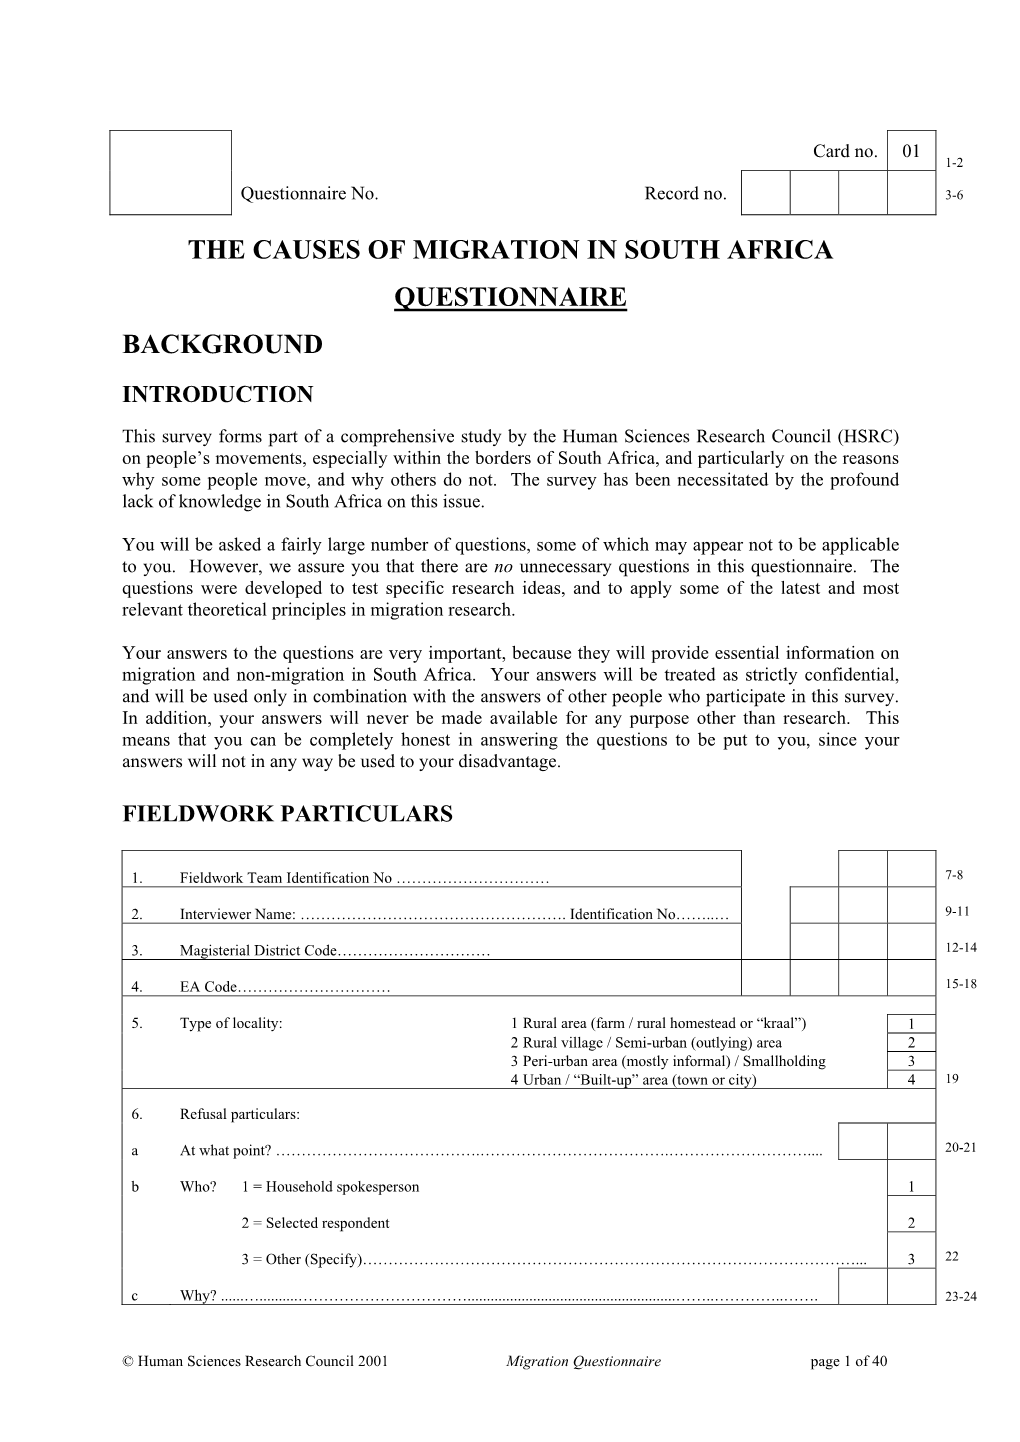 The Causes of Migration in South Africa Questionnaire